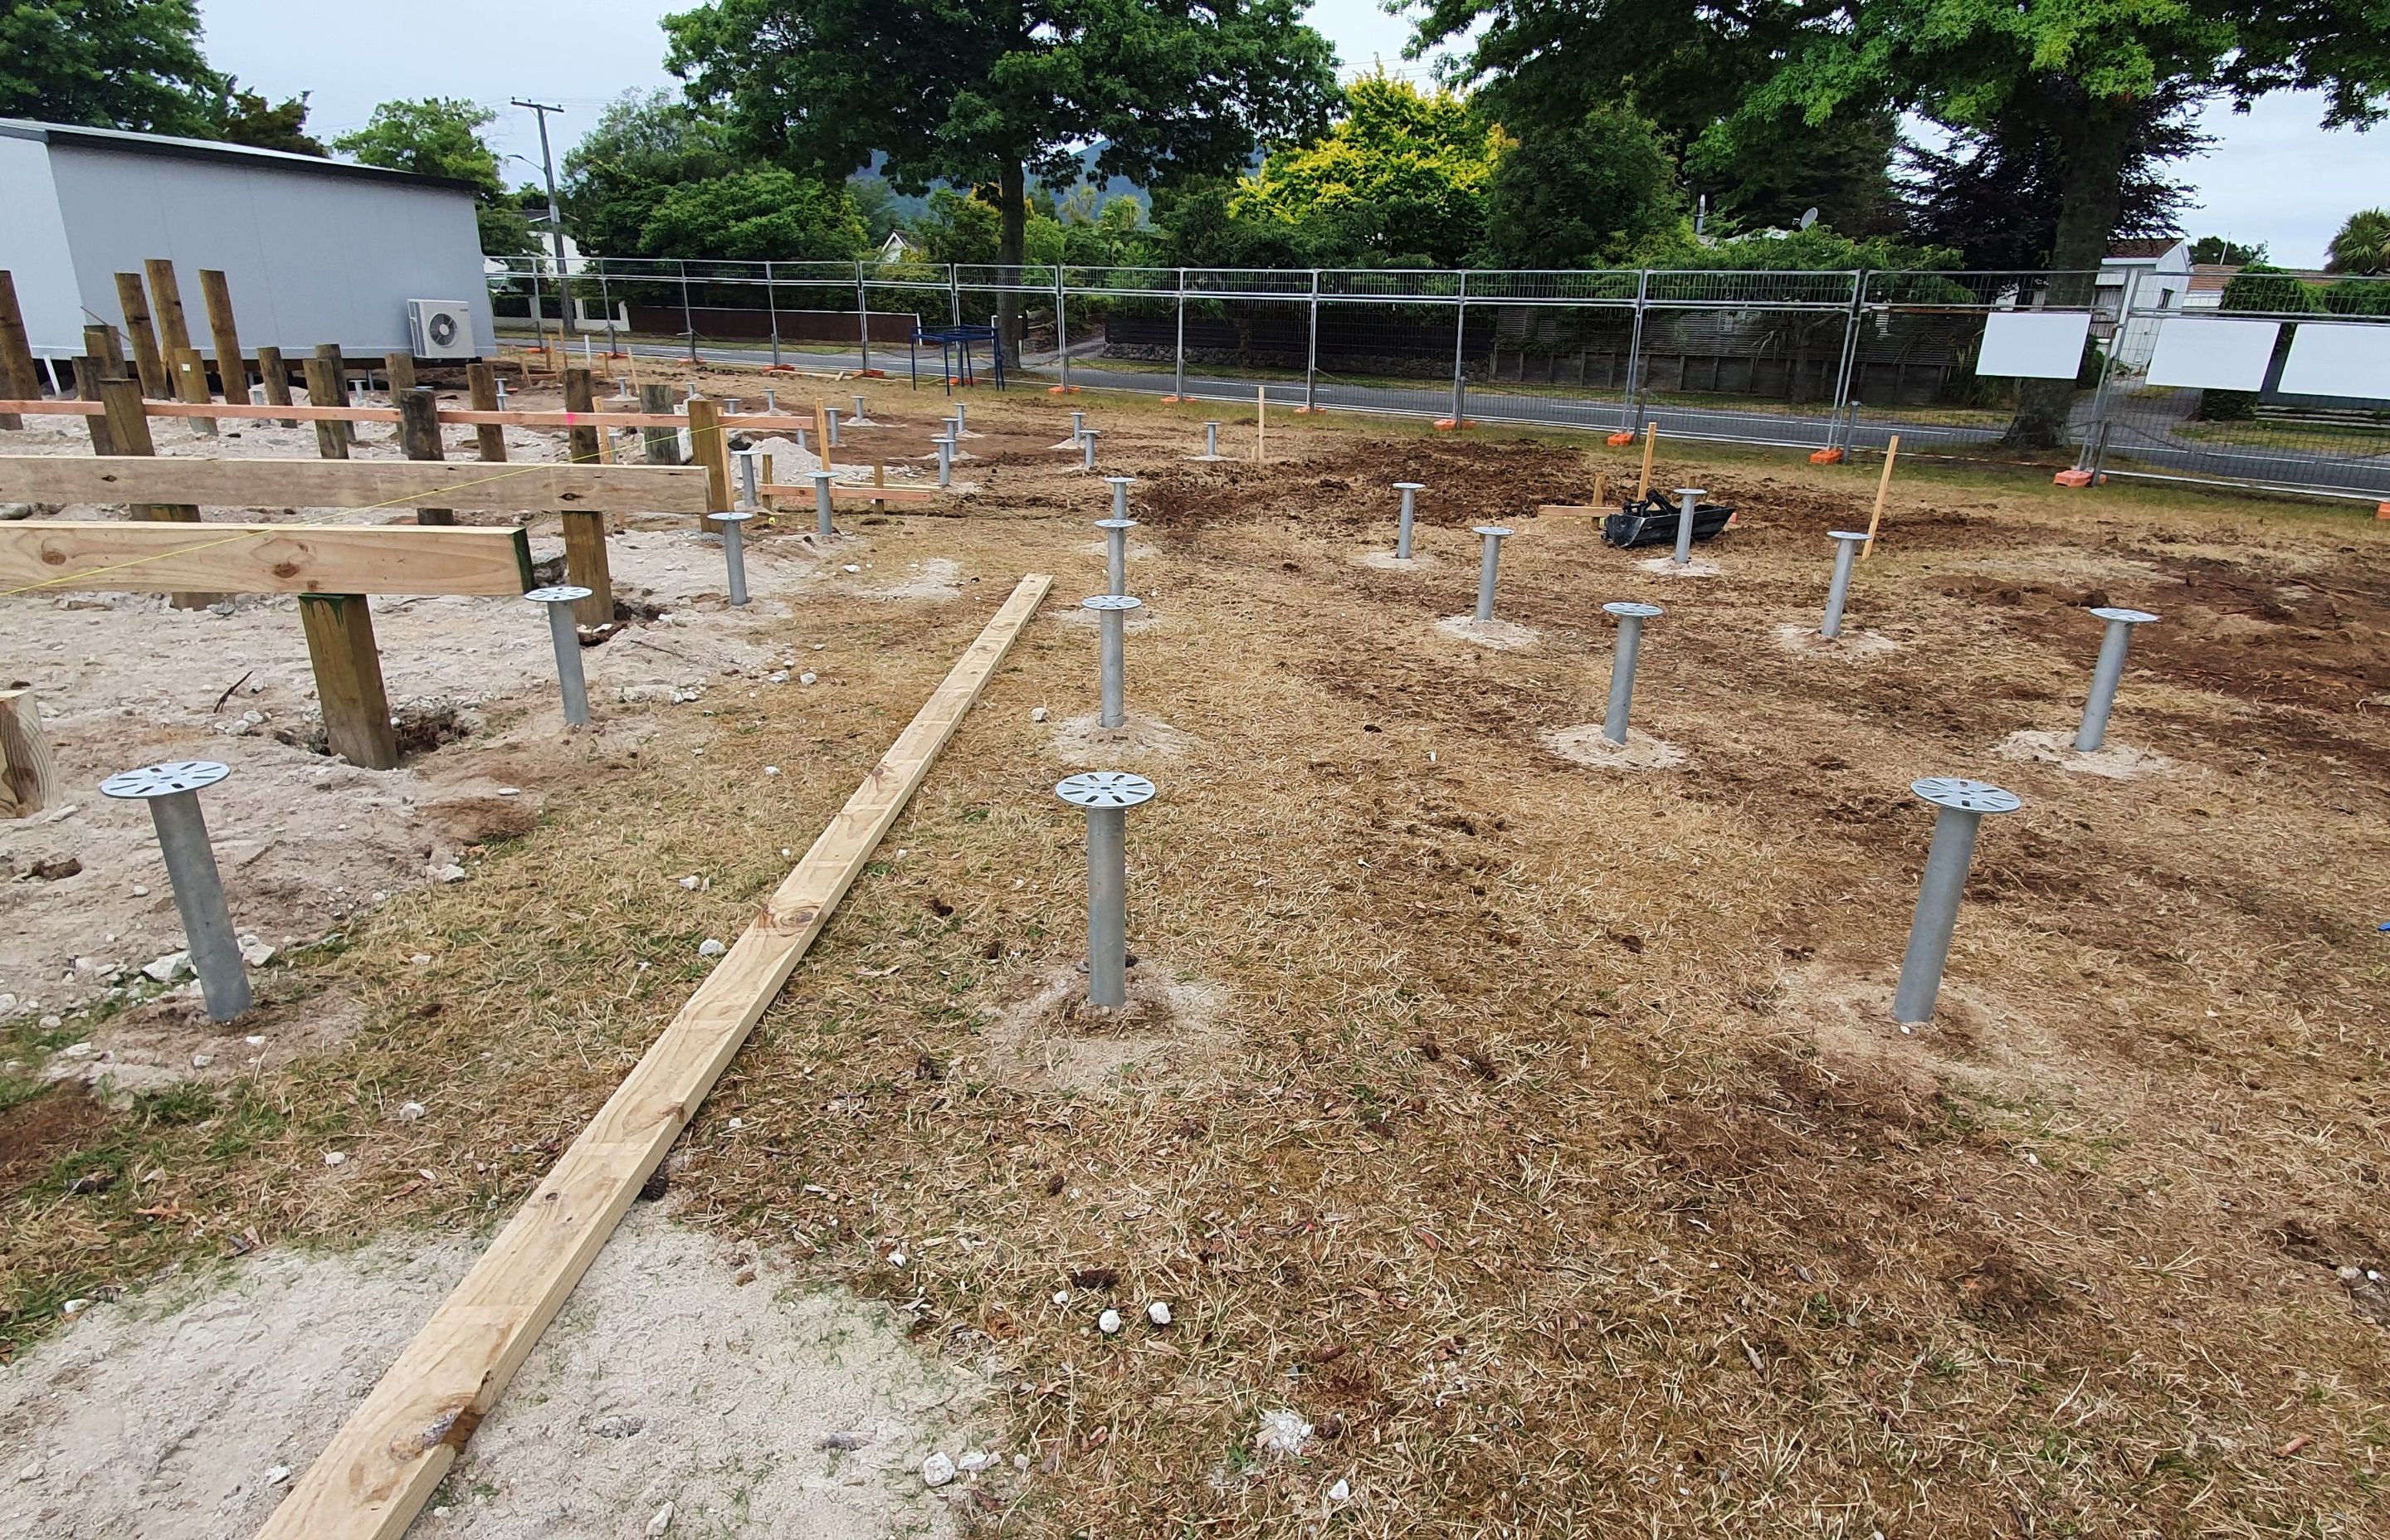 Stop Digging provided and installed 500 ground screws to provide foundational support to 18 prefab classrooms for Tauhara College.